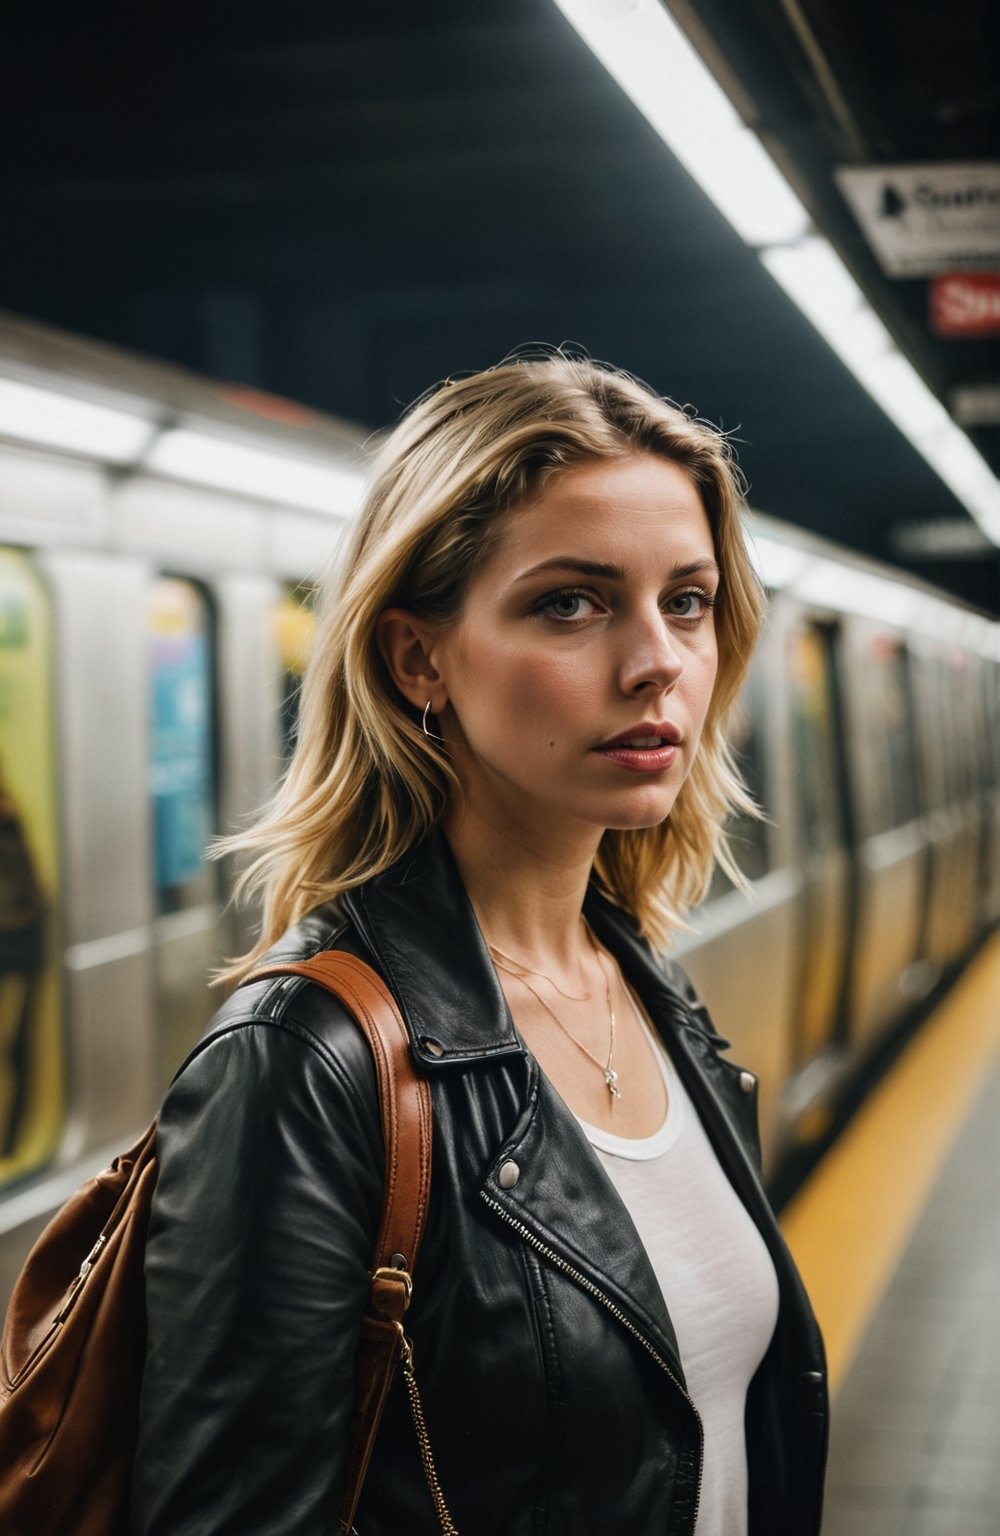 street photography in style of Larry Clark, contemporary female at a subway station, in fronti between blurry subway passing by, photorealism, cinematic, accent lightning, global illumination, shot on Sony a7iv, sigma 30mm.